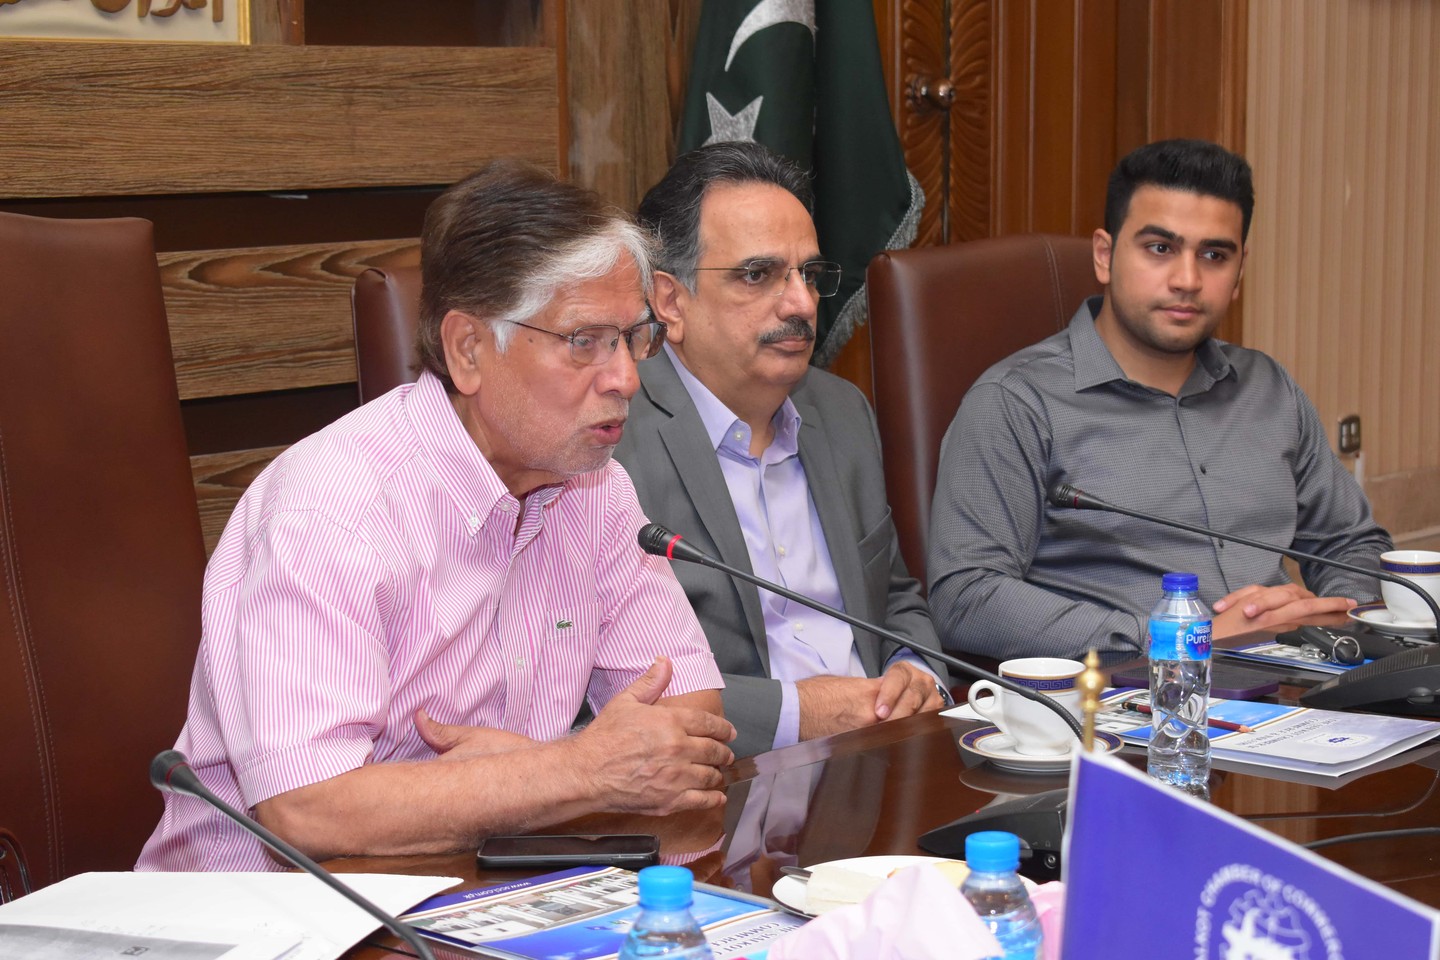 On July 22, 2023, Mr. Abdul Ghafoor Malik, President, SCCI, chaired a meeting of the Sialkot Export Processing Zone investors to address the Cancellation of Plots and plan for the future. The meeting’s highlights included the success in stopping the auction and obtaining an extended construction timeframe from the Provincial Government. Investors were instructed to submit their project proposals and construction drawings within 3 months, with a one-year deadline for facility establishment. Further extensions from the Government would not be granted, except for ongoing construction cases, considered on a case-by-case basis. To facilitate the process, a Facilitation Desk would be set up at Sialkot Chamber to assist EPZ investors with submitting their documents to the Punjab Small Industries Corporation (PSIC).